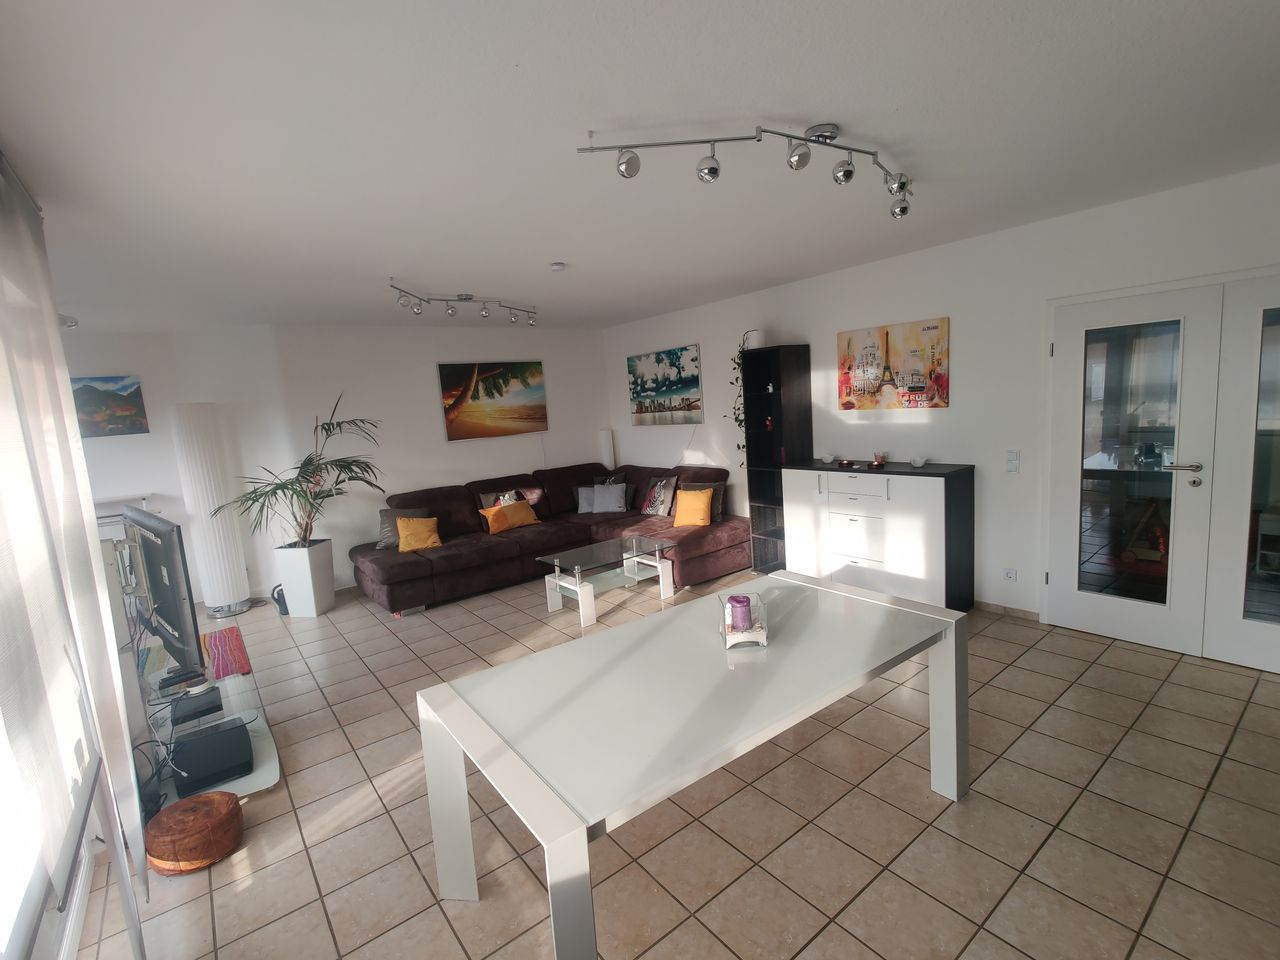 Fantastic 83sqm city apartment with full amenities and top location!